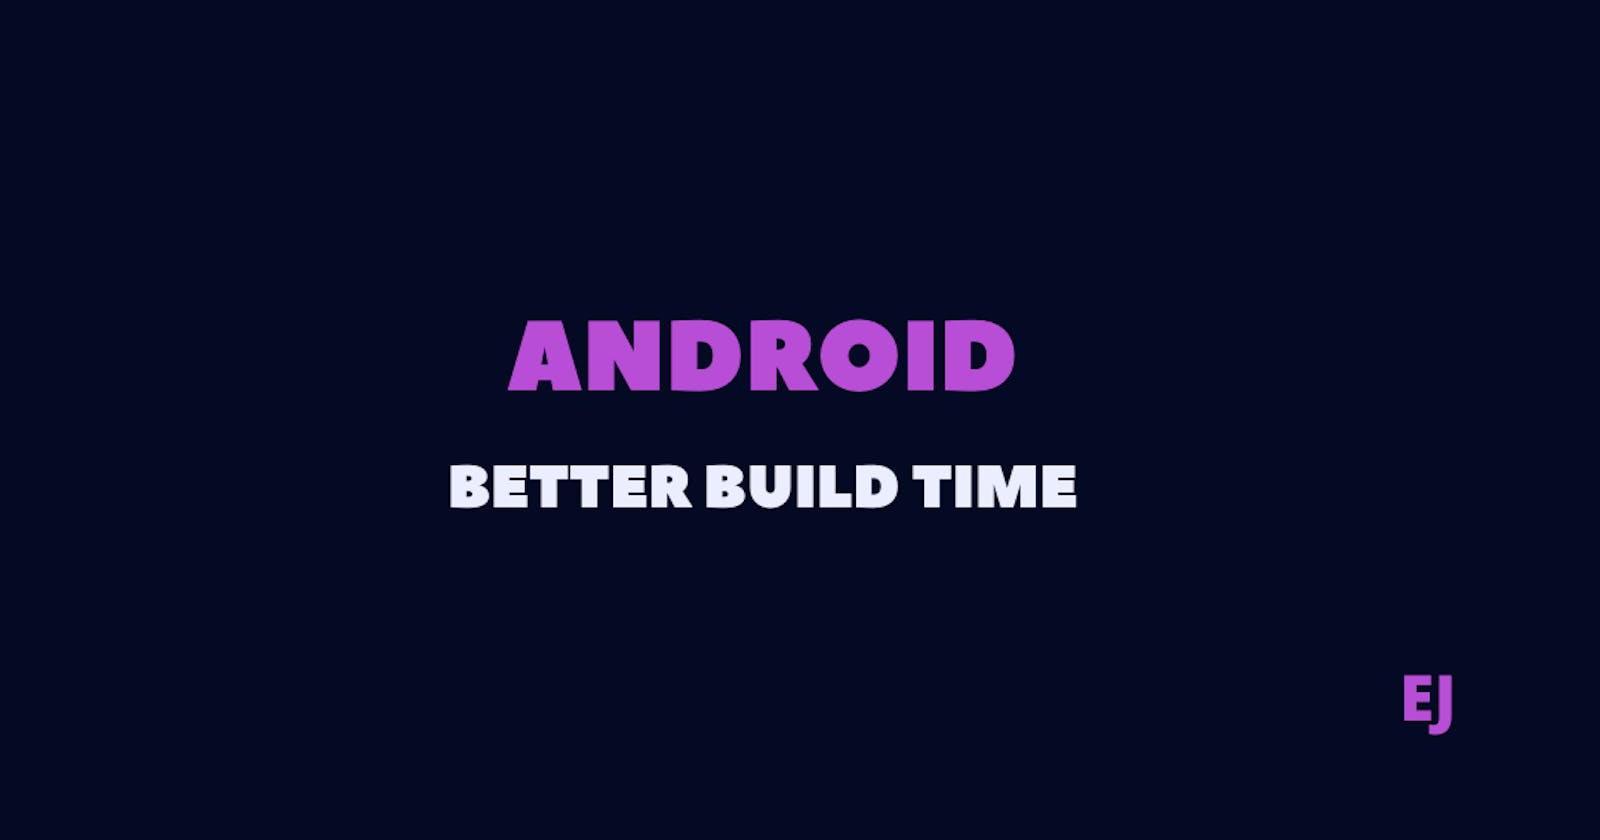 Android, better build time